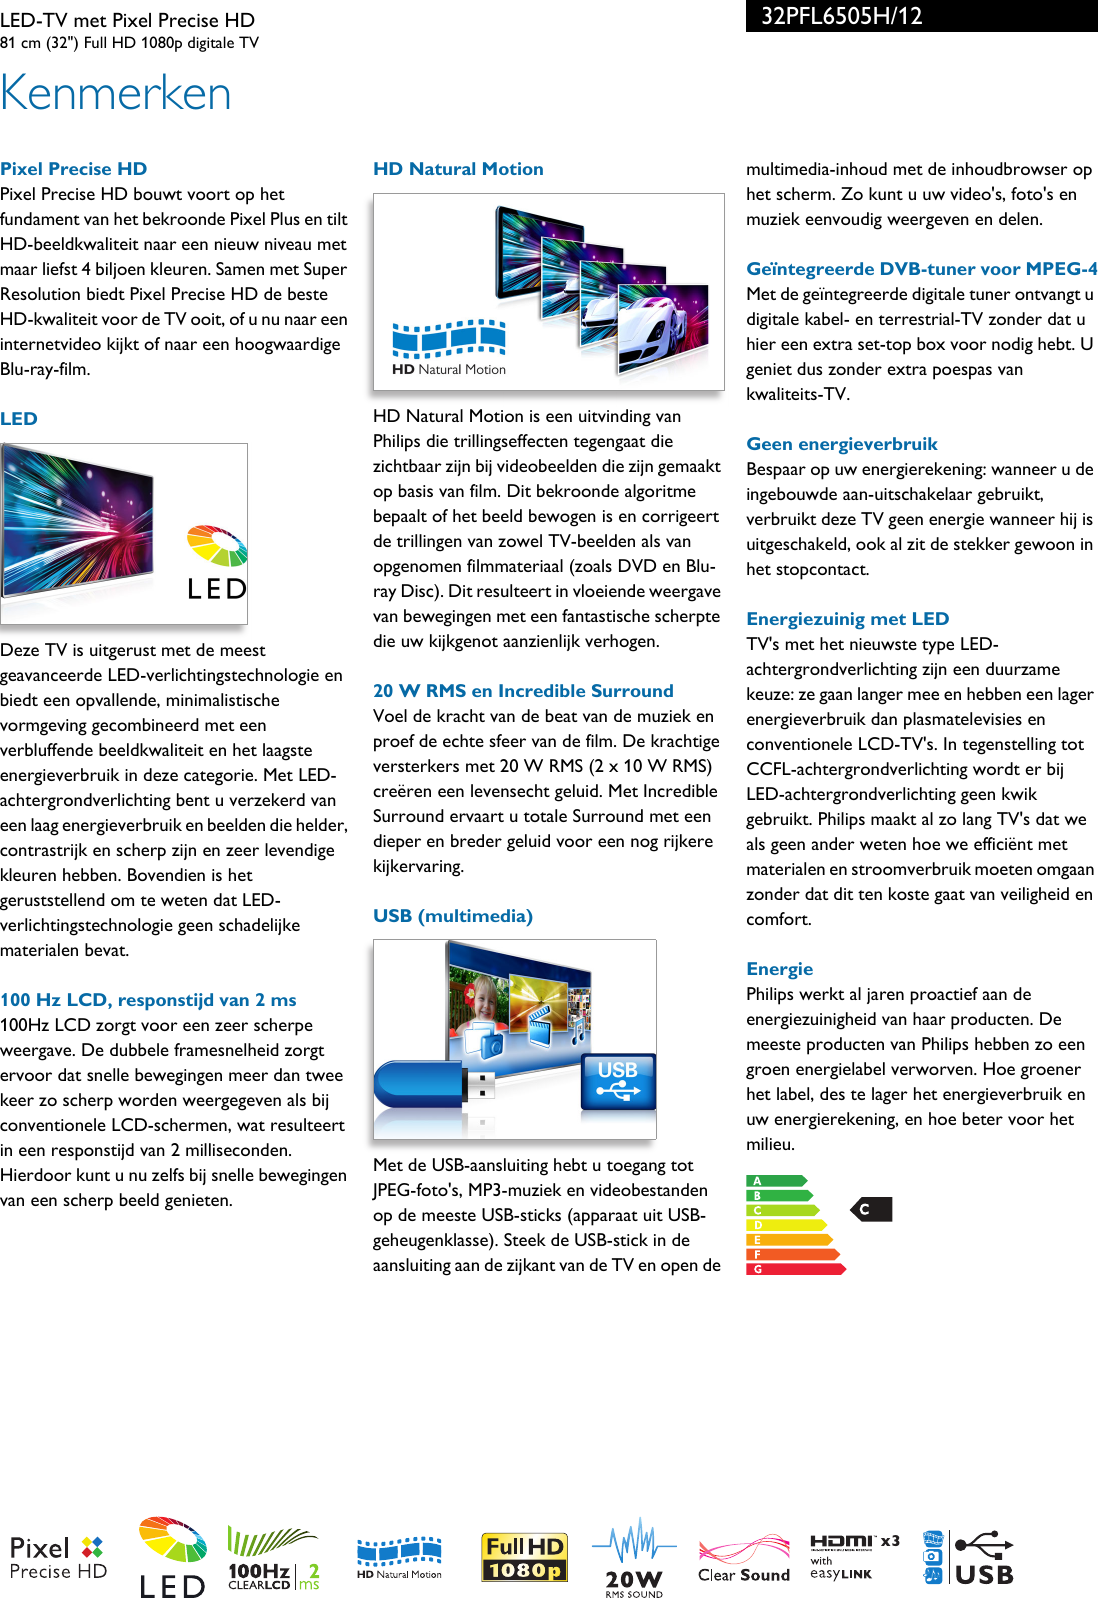 Page 2 of 3 - Philips 32PFL6505H/12 LED-TV Met Pixel Precise HD User Manual Brochure 32pfl6505h 12 Pss Nldbe